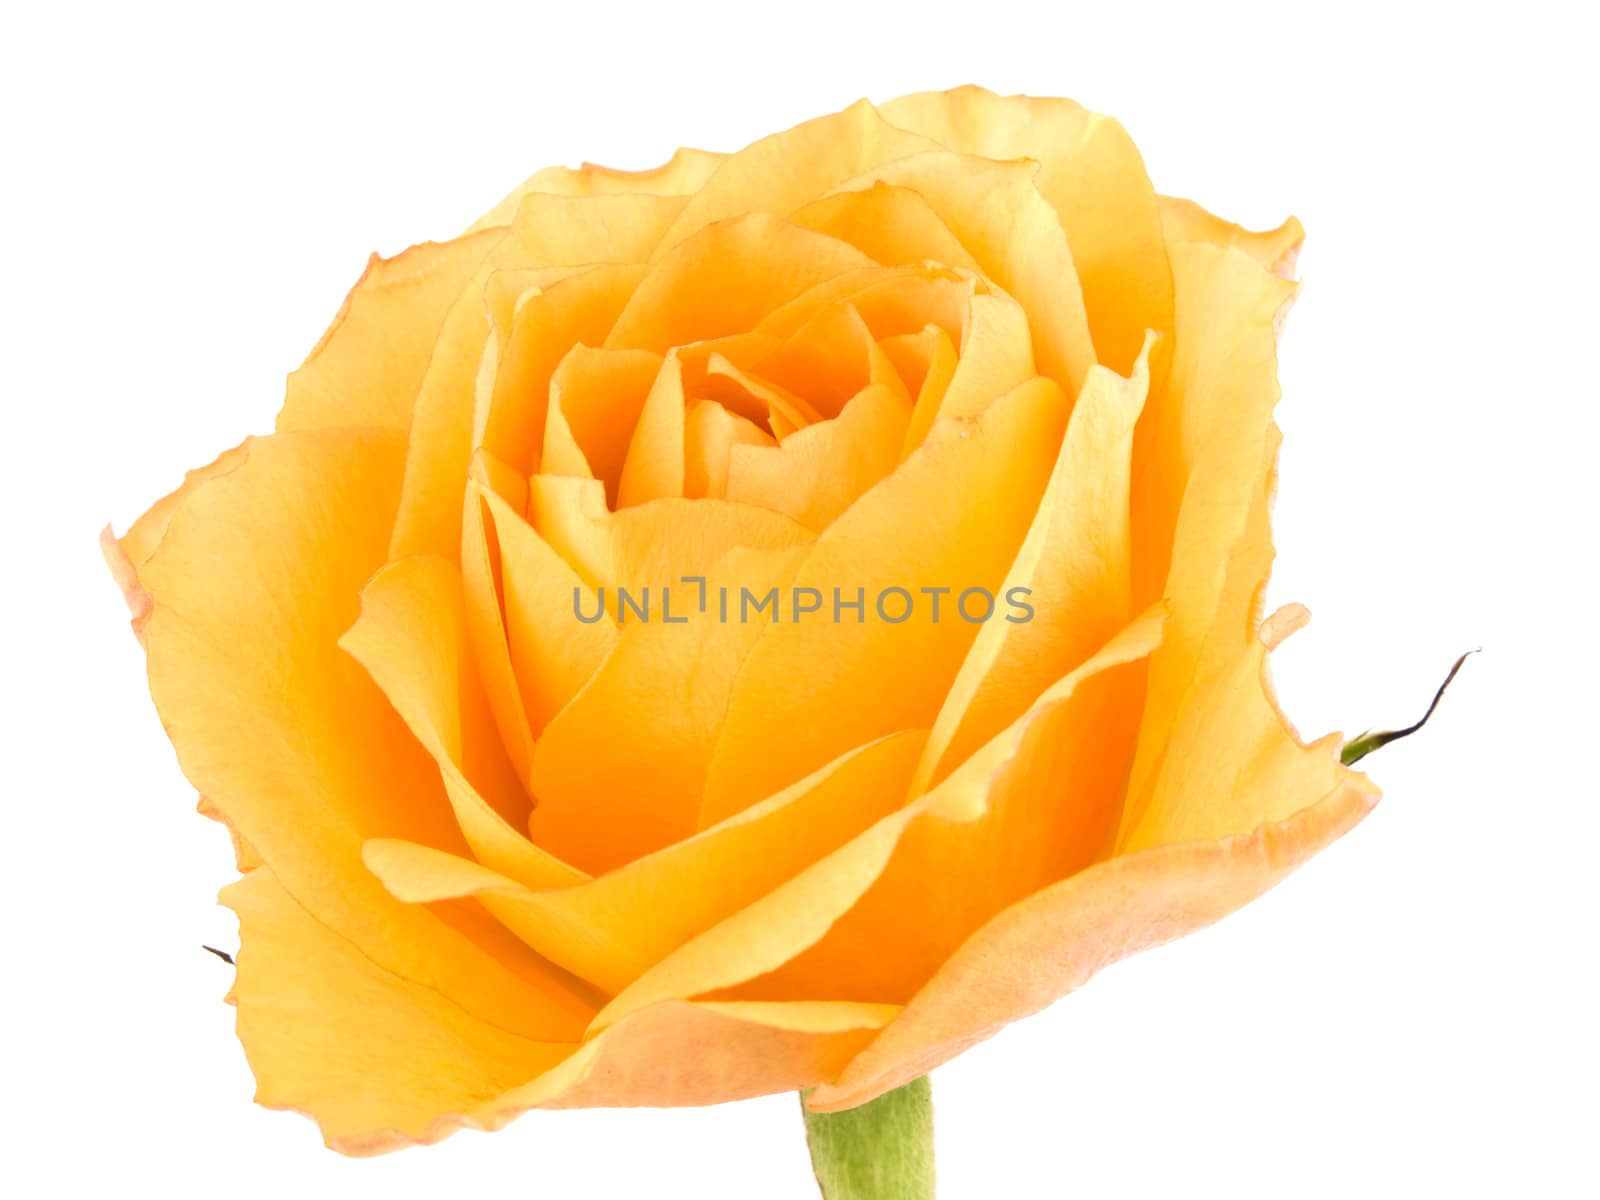 Picture of tea rose on white background.